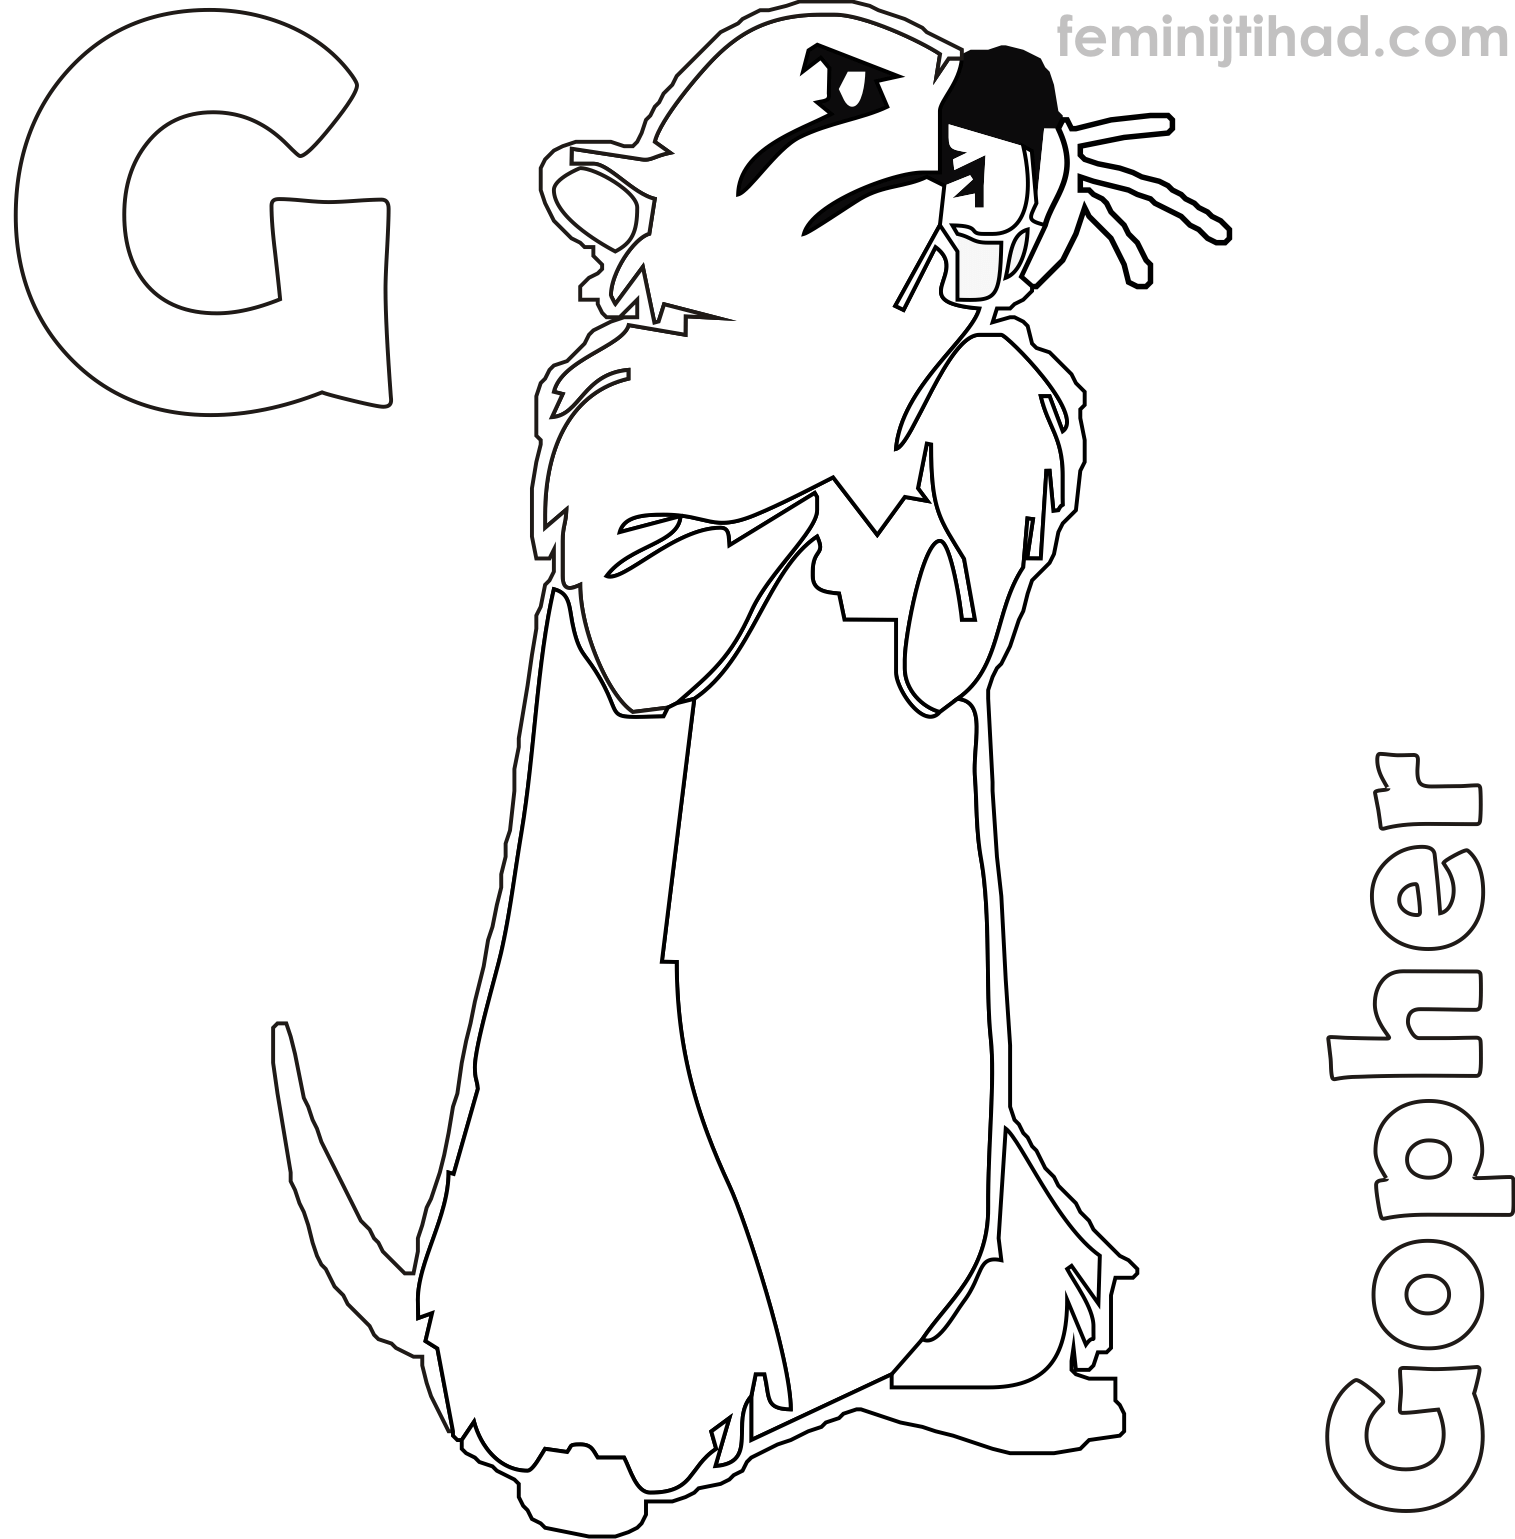 Printable Coloring Page of Gopher